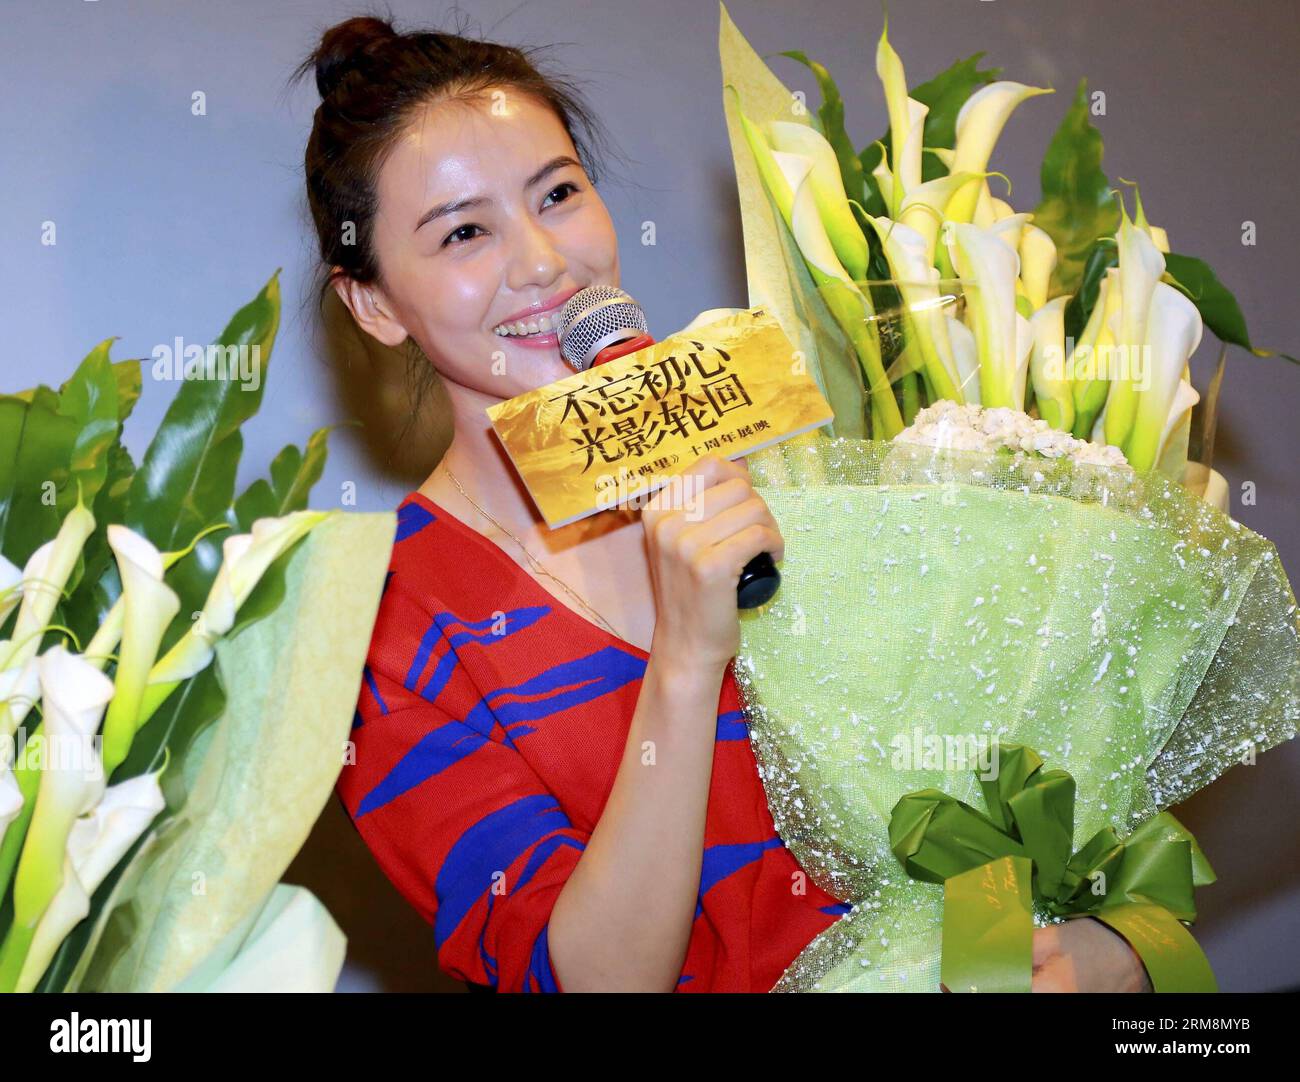 Actress Gao Yuanyuan attends the 10th anniversary activity of film Mountain Patrol in Beijing, capital of China, April 20, 2014. Film Mountain Patrol , directed by Lu Chuan, was screened in China on Oct. 1, 2004. (Xinhua) (zwy) CHINA-BEIJING-FILM MOUNTAIN PATROL-TENTH ANNIVERSARY(CN) PUBLICATIONxNOTxINxCHN   actress Gao Yuan Yuan Attends The 10th Anniversary Activity of Film Mountain Patrol in Beijing Capital of China April 20 2014 Film Mountain Patrol Directed by Lu Chuan what screened in China ON OCT 1 2004 XINHUA  China Beijing Film Mountain Patrol Tenth Anniversary CN PUBLICATIONxNOTxINxCH Stock Photo